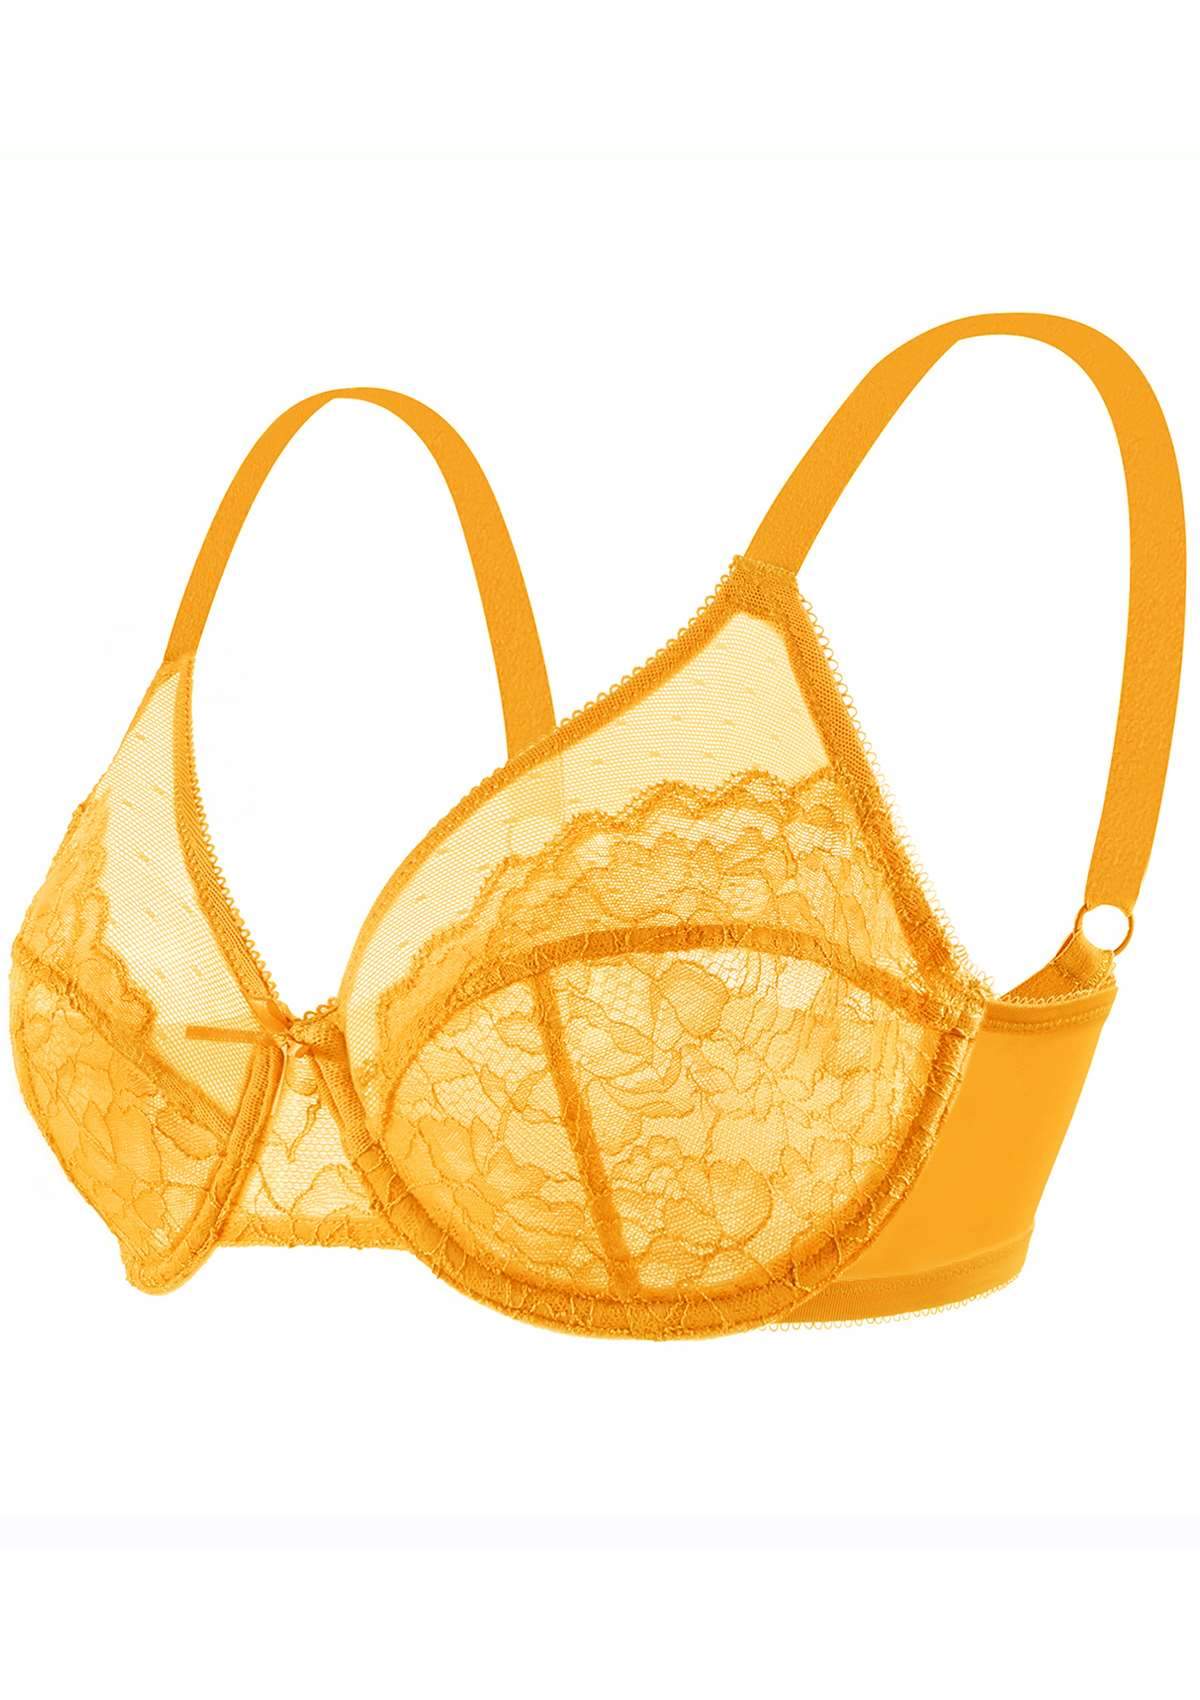 HSIA Enchante Bra And Panty Sets: Unpadded Bra With Back Support - Cadmium Yellow / 36 / G